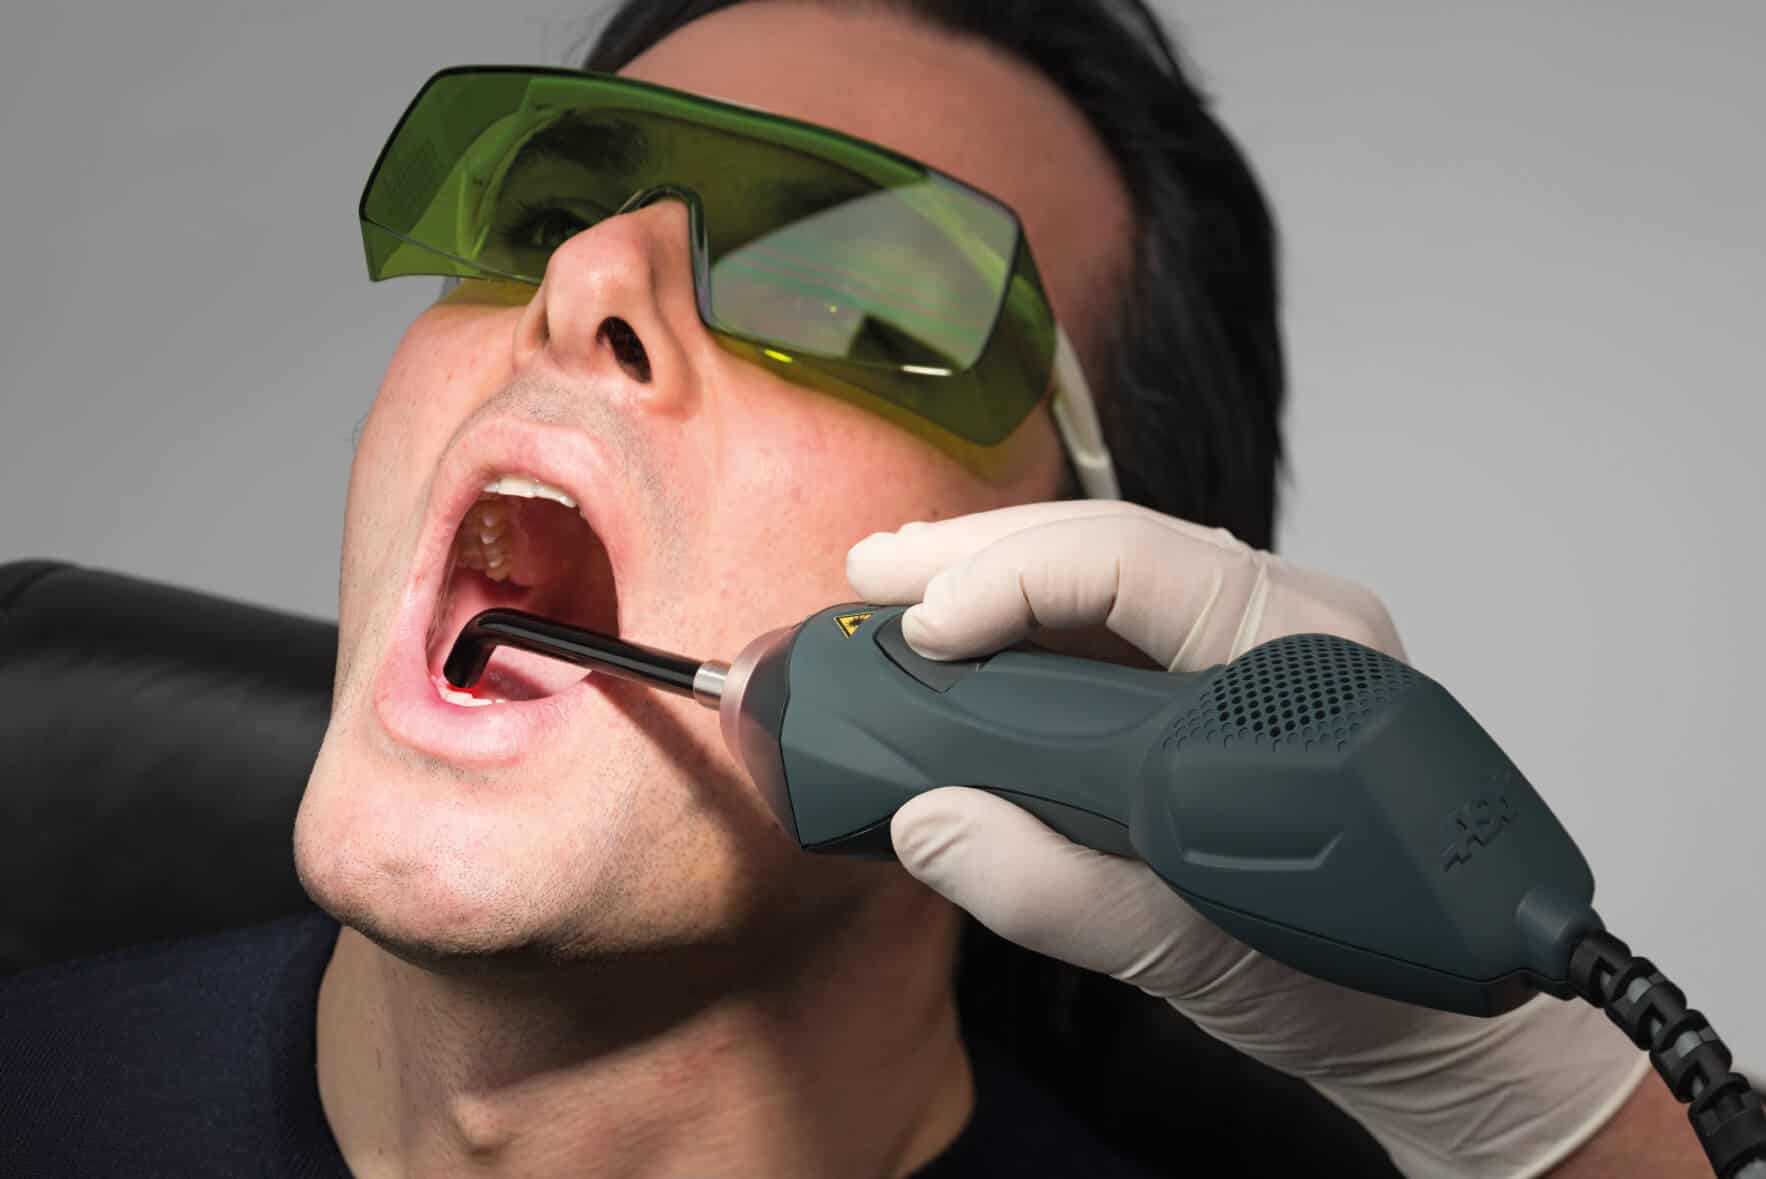 MLS® Laser therapy being used intraorally. It can be used to treat periodontal disease, to accelerate tooth movement in orthodontics, in restorative dentistry, and to treat oral conditions such as oral mucositis, xerostomia, and ulcers.